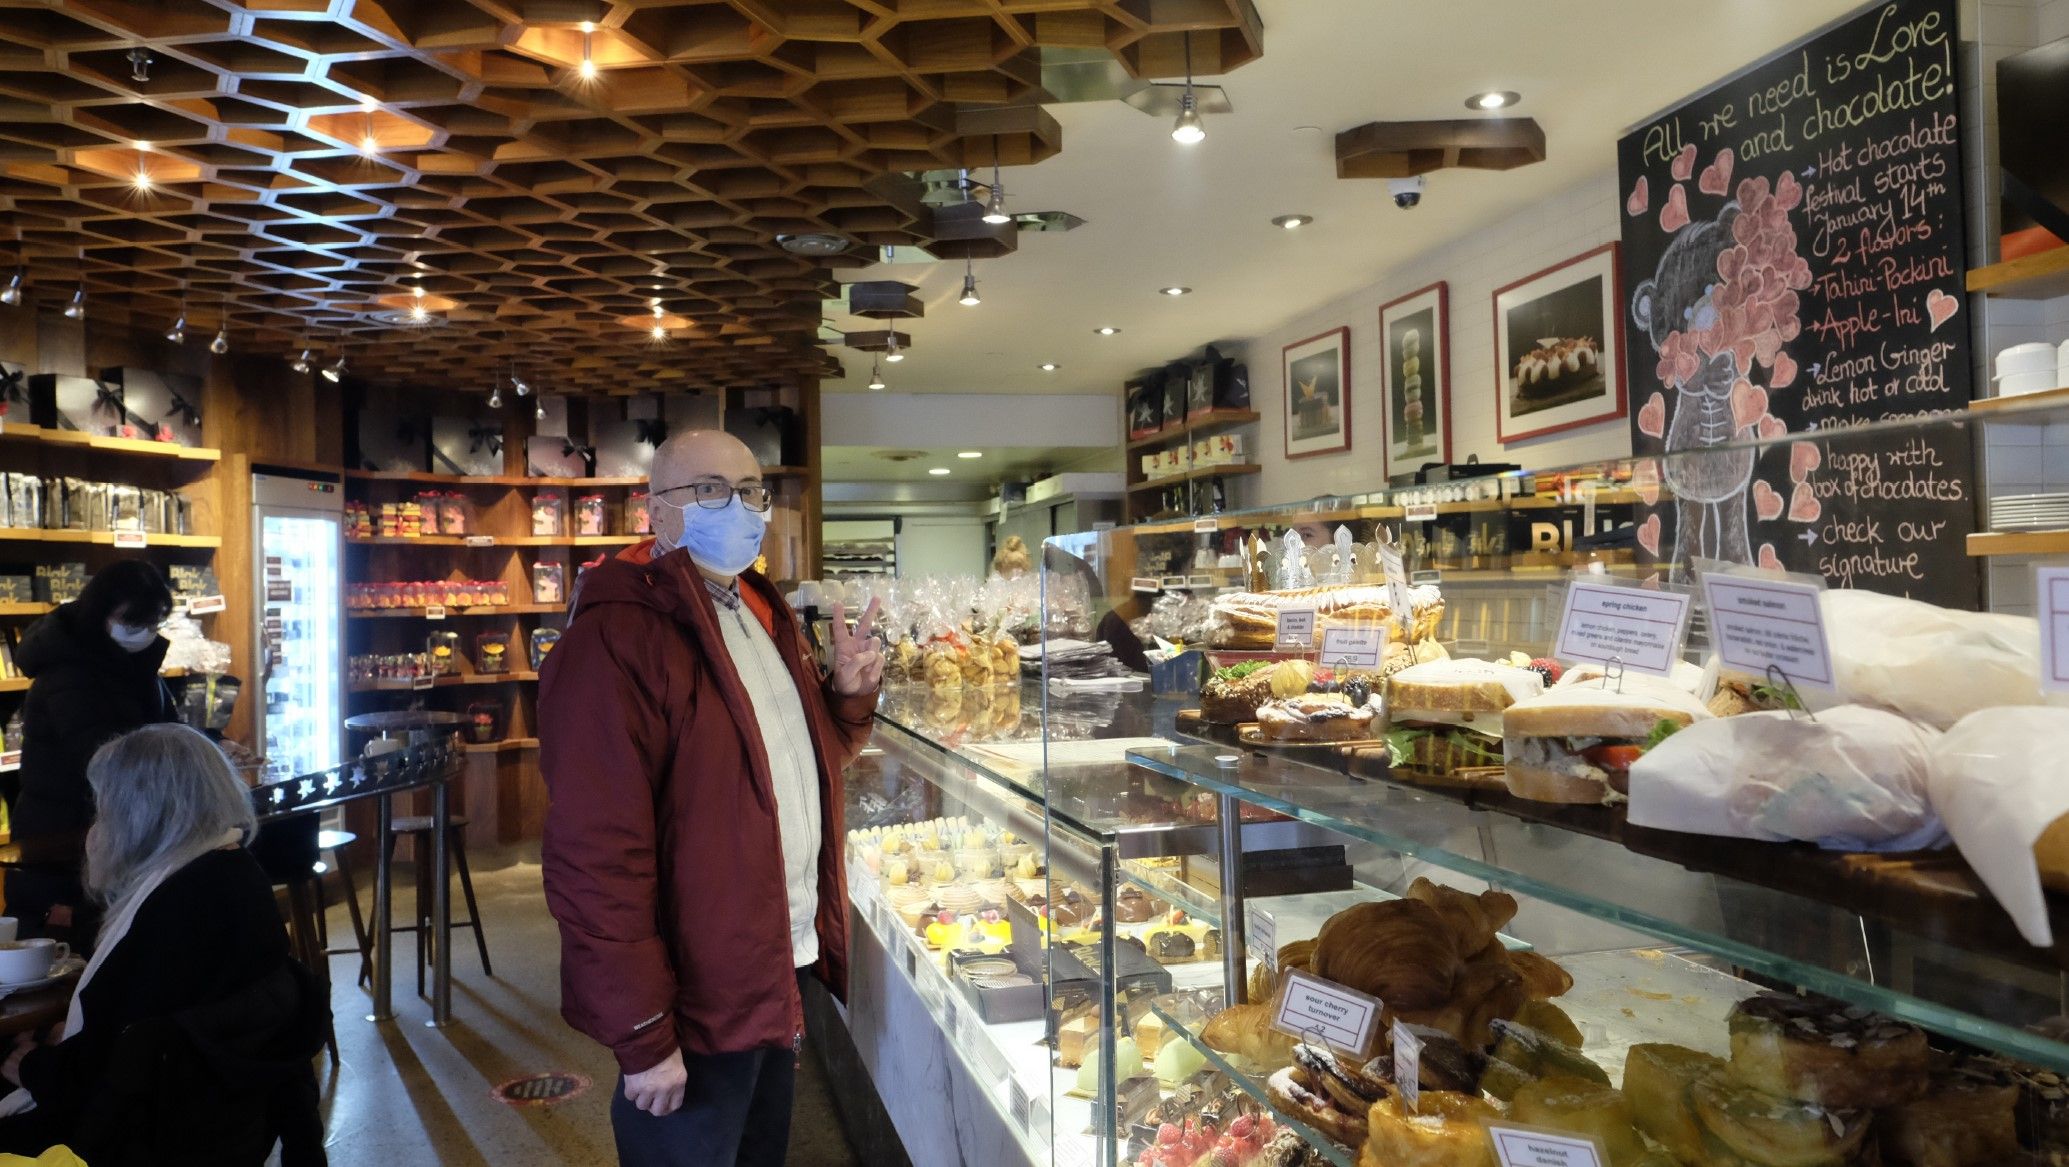 Michel at a Bakery